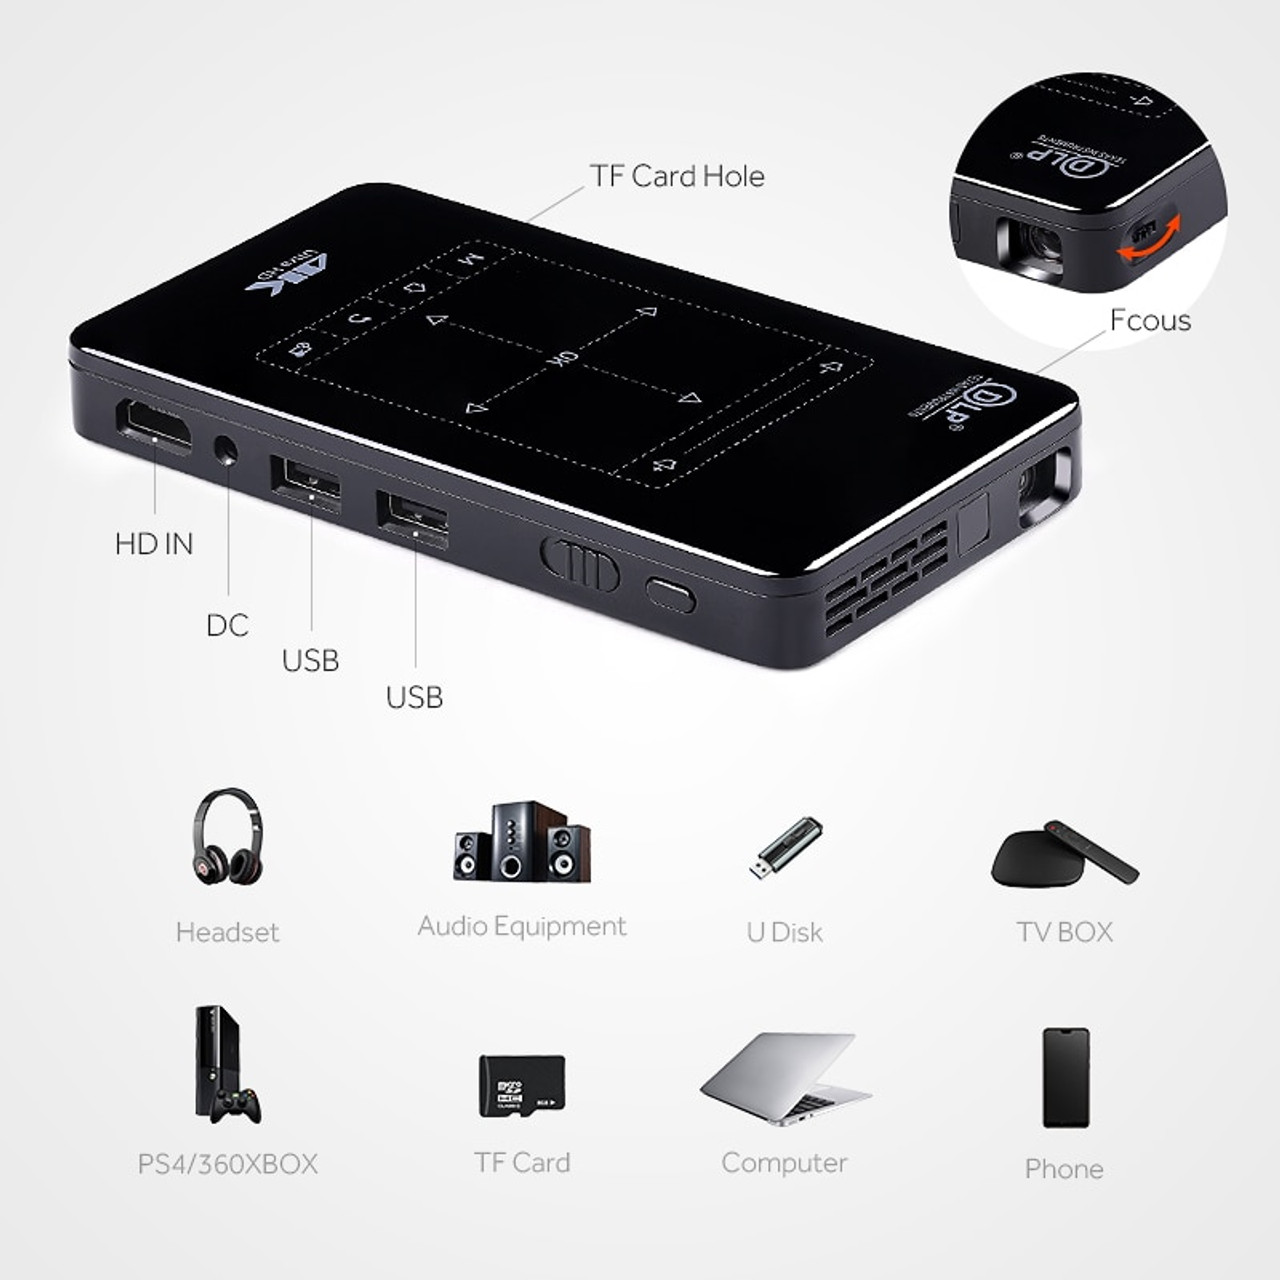 AUN MINI Projector D7 Android 6.0 Beamer, Built-in 2.4G/5G WIFI, Bluetooth,  4,000mAH Battery. HDMI. Support 4K proyector DLP 